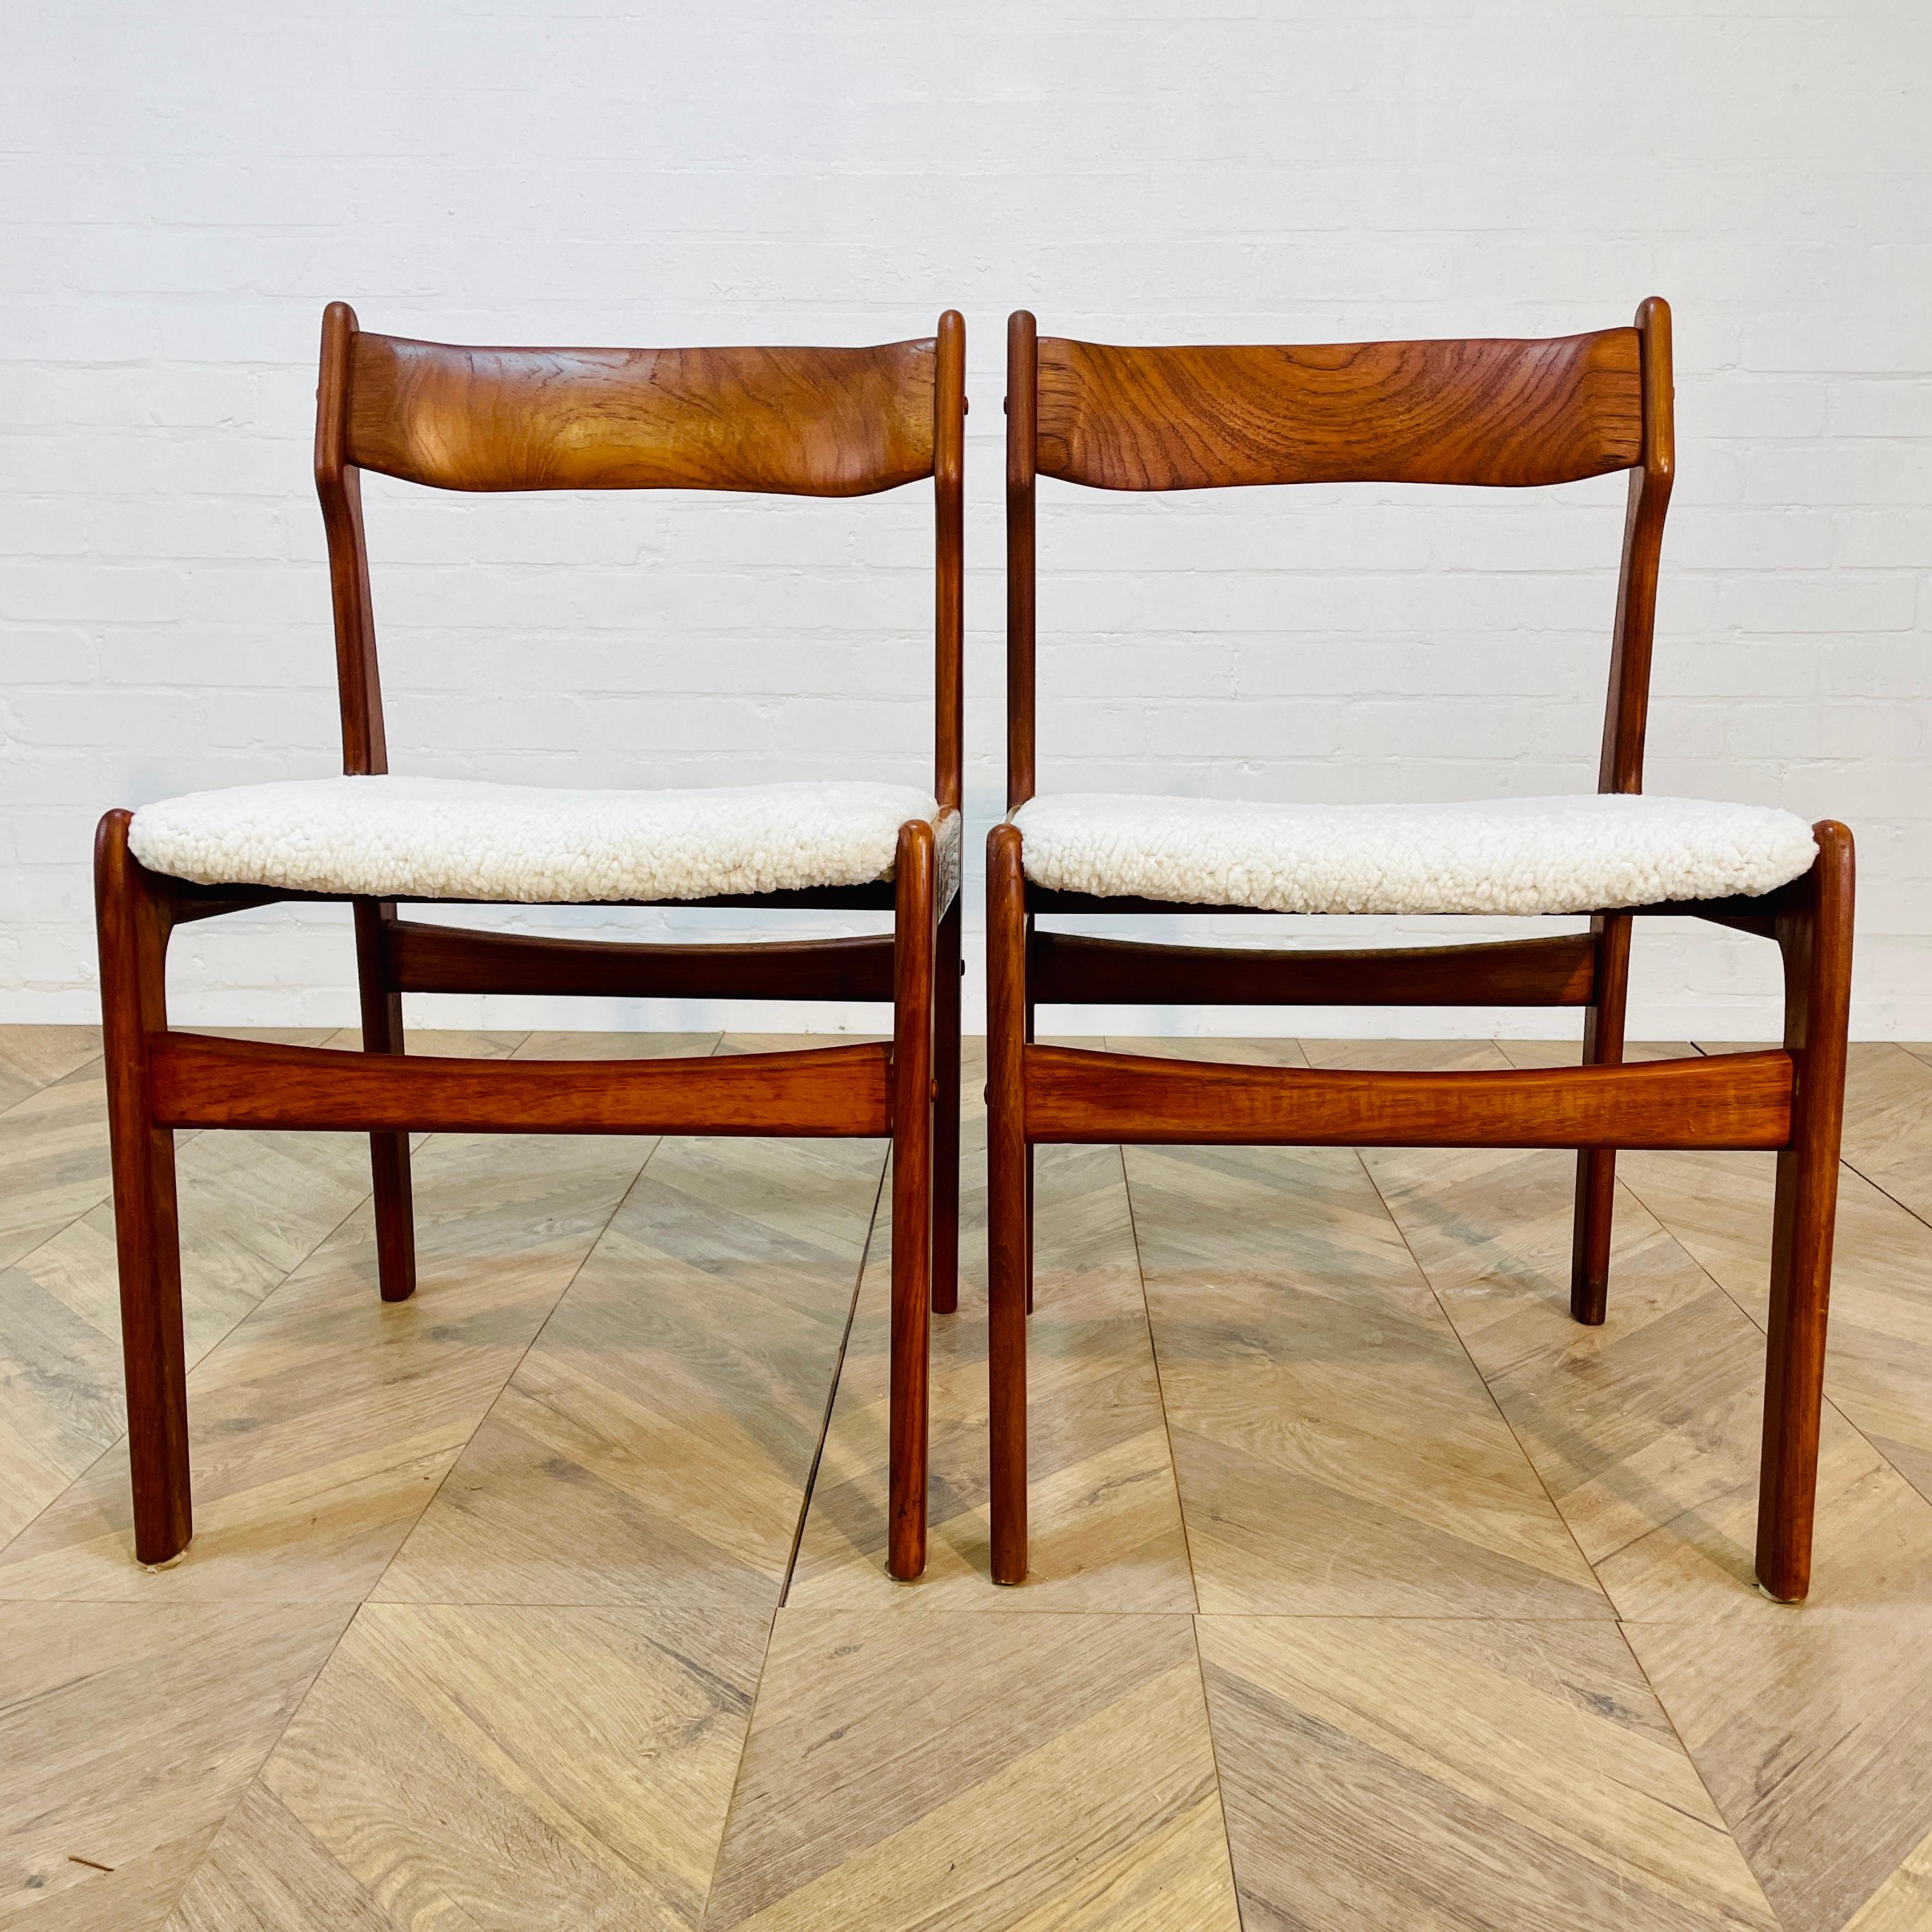 A Beautiful Set of 2, Teak Danish Dining Chairs Inspired by Erik Buch and manufactured in the 1970s.

The chair frames are all solid & completely original, in good overall condition with signs of use, in the form of scratches and abrasions,